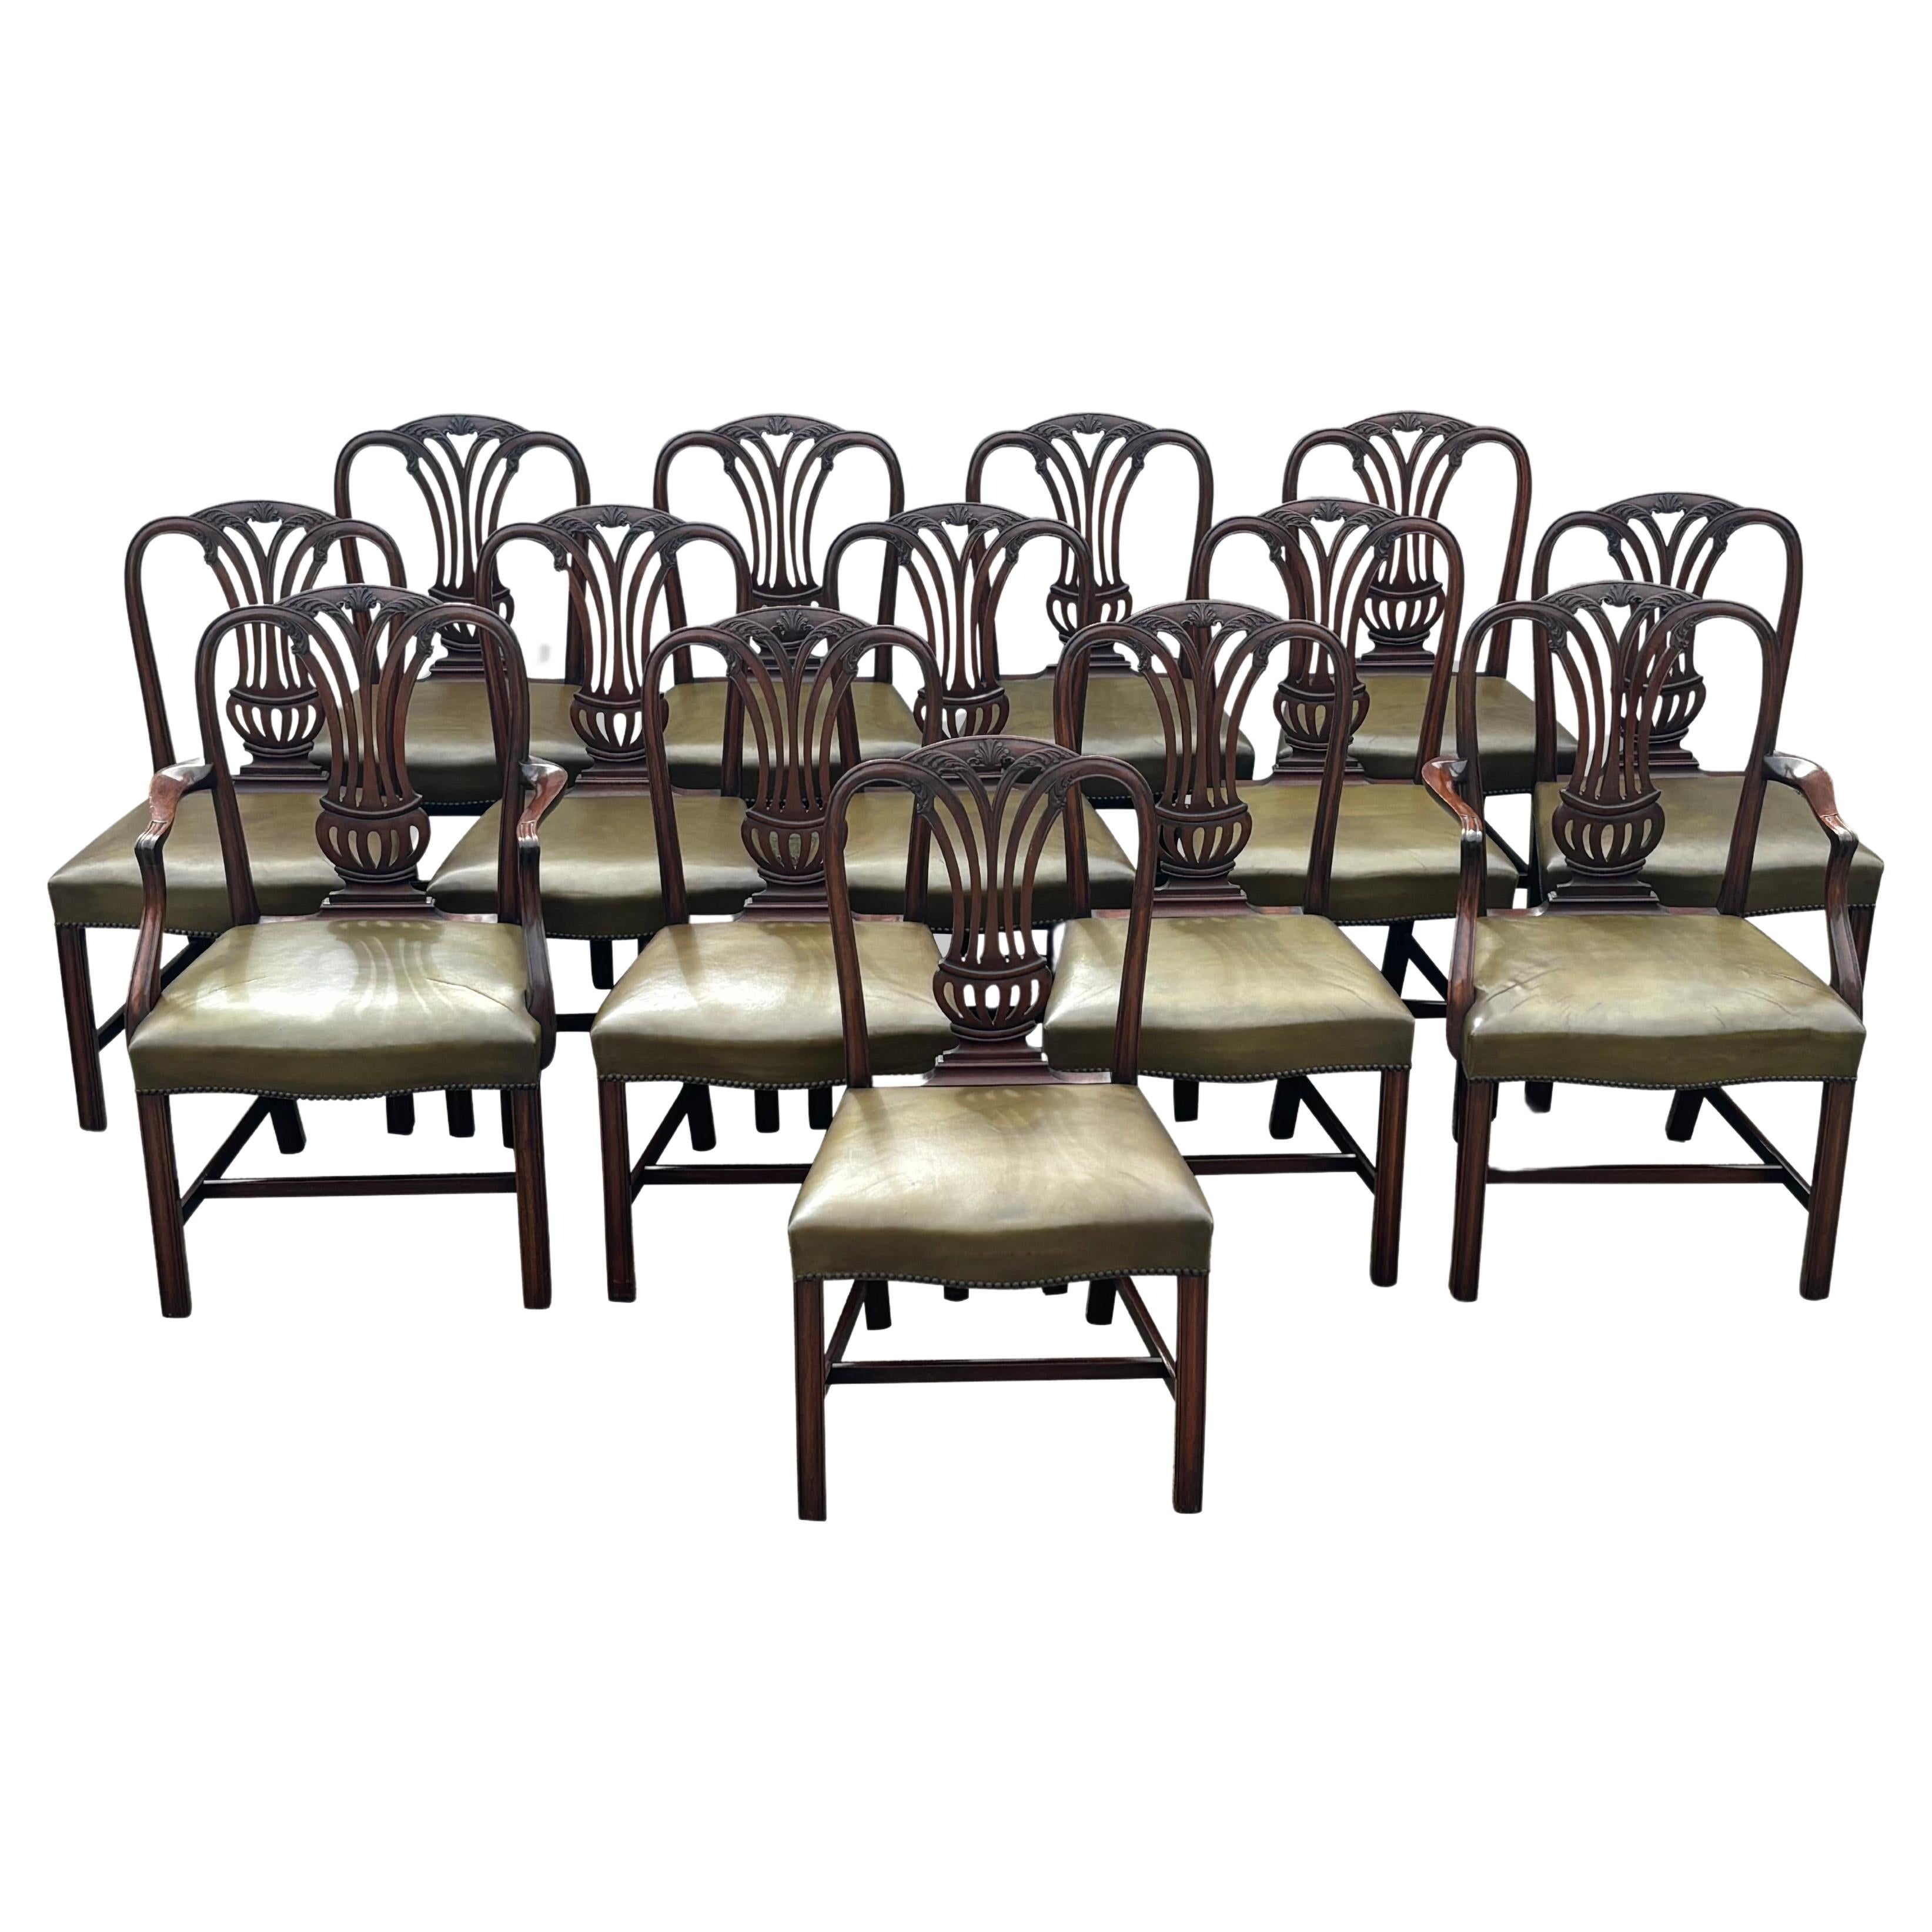 Large Set of 14 Hepplewhite Dining Room Chairs For Sale